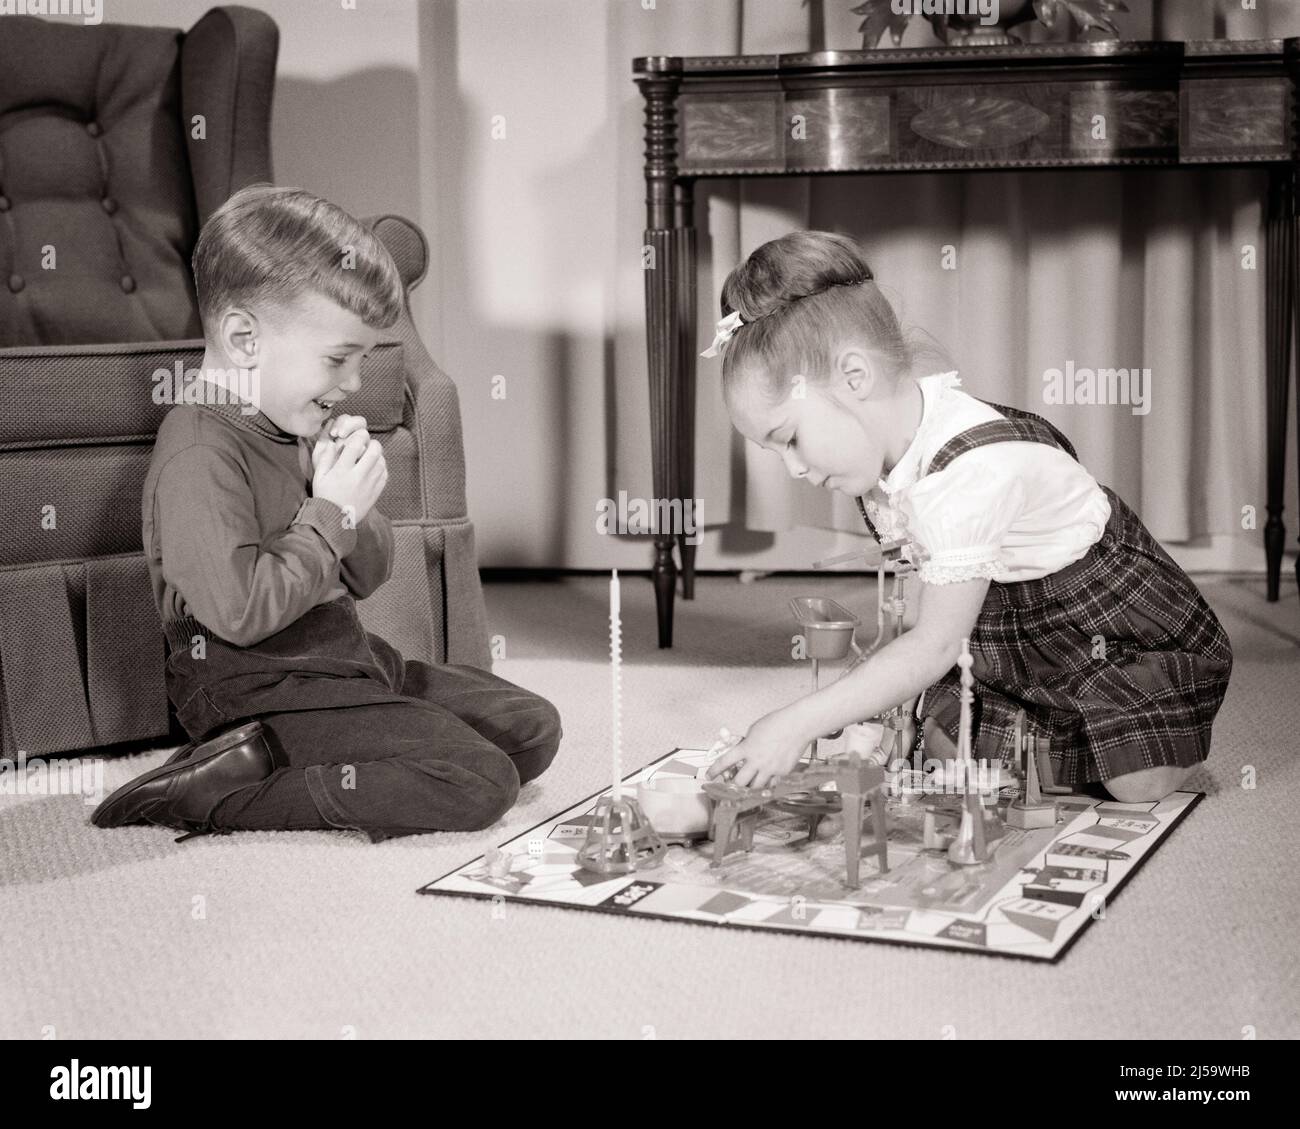 1960s LITTLE BOY AND GIRL BROTHER AND SISTER SITTING ON LIVING ROOM FLOOR PLAYING THE BOARD GAME MOUSE TRAP TOGETHER - j11898 HAR001 HARS HOME LIFE COPY SPACE FULL-LENGTH PERSONS MALES SIBLINGS CONFIDENCE SISTERS B&W SUCCESS HAPPINESS LEISURE STRATEGY LIVING ROOM AND EXCITEMENT RECREATION TRAP ON THE SIBLING MOUSE CONNECTION CONCEPTUAL STYLISH MOUSETRAP BOARD GAME GROWTH JUVENILES PRECISION RELAXATION TOGETHERNESS BLACK AND WHITE CAUCASIAN ETHNICITY HAR001 OLD FASHIONED Stock Photo